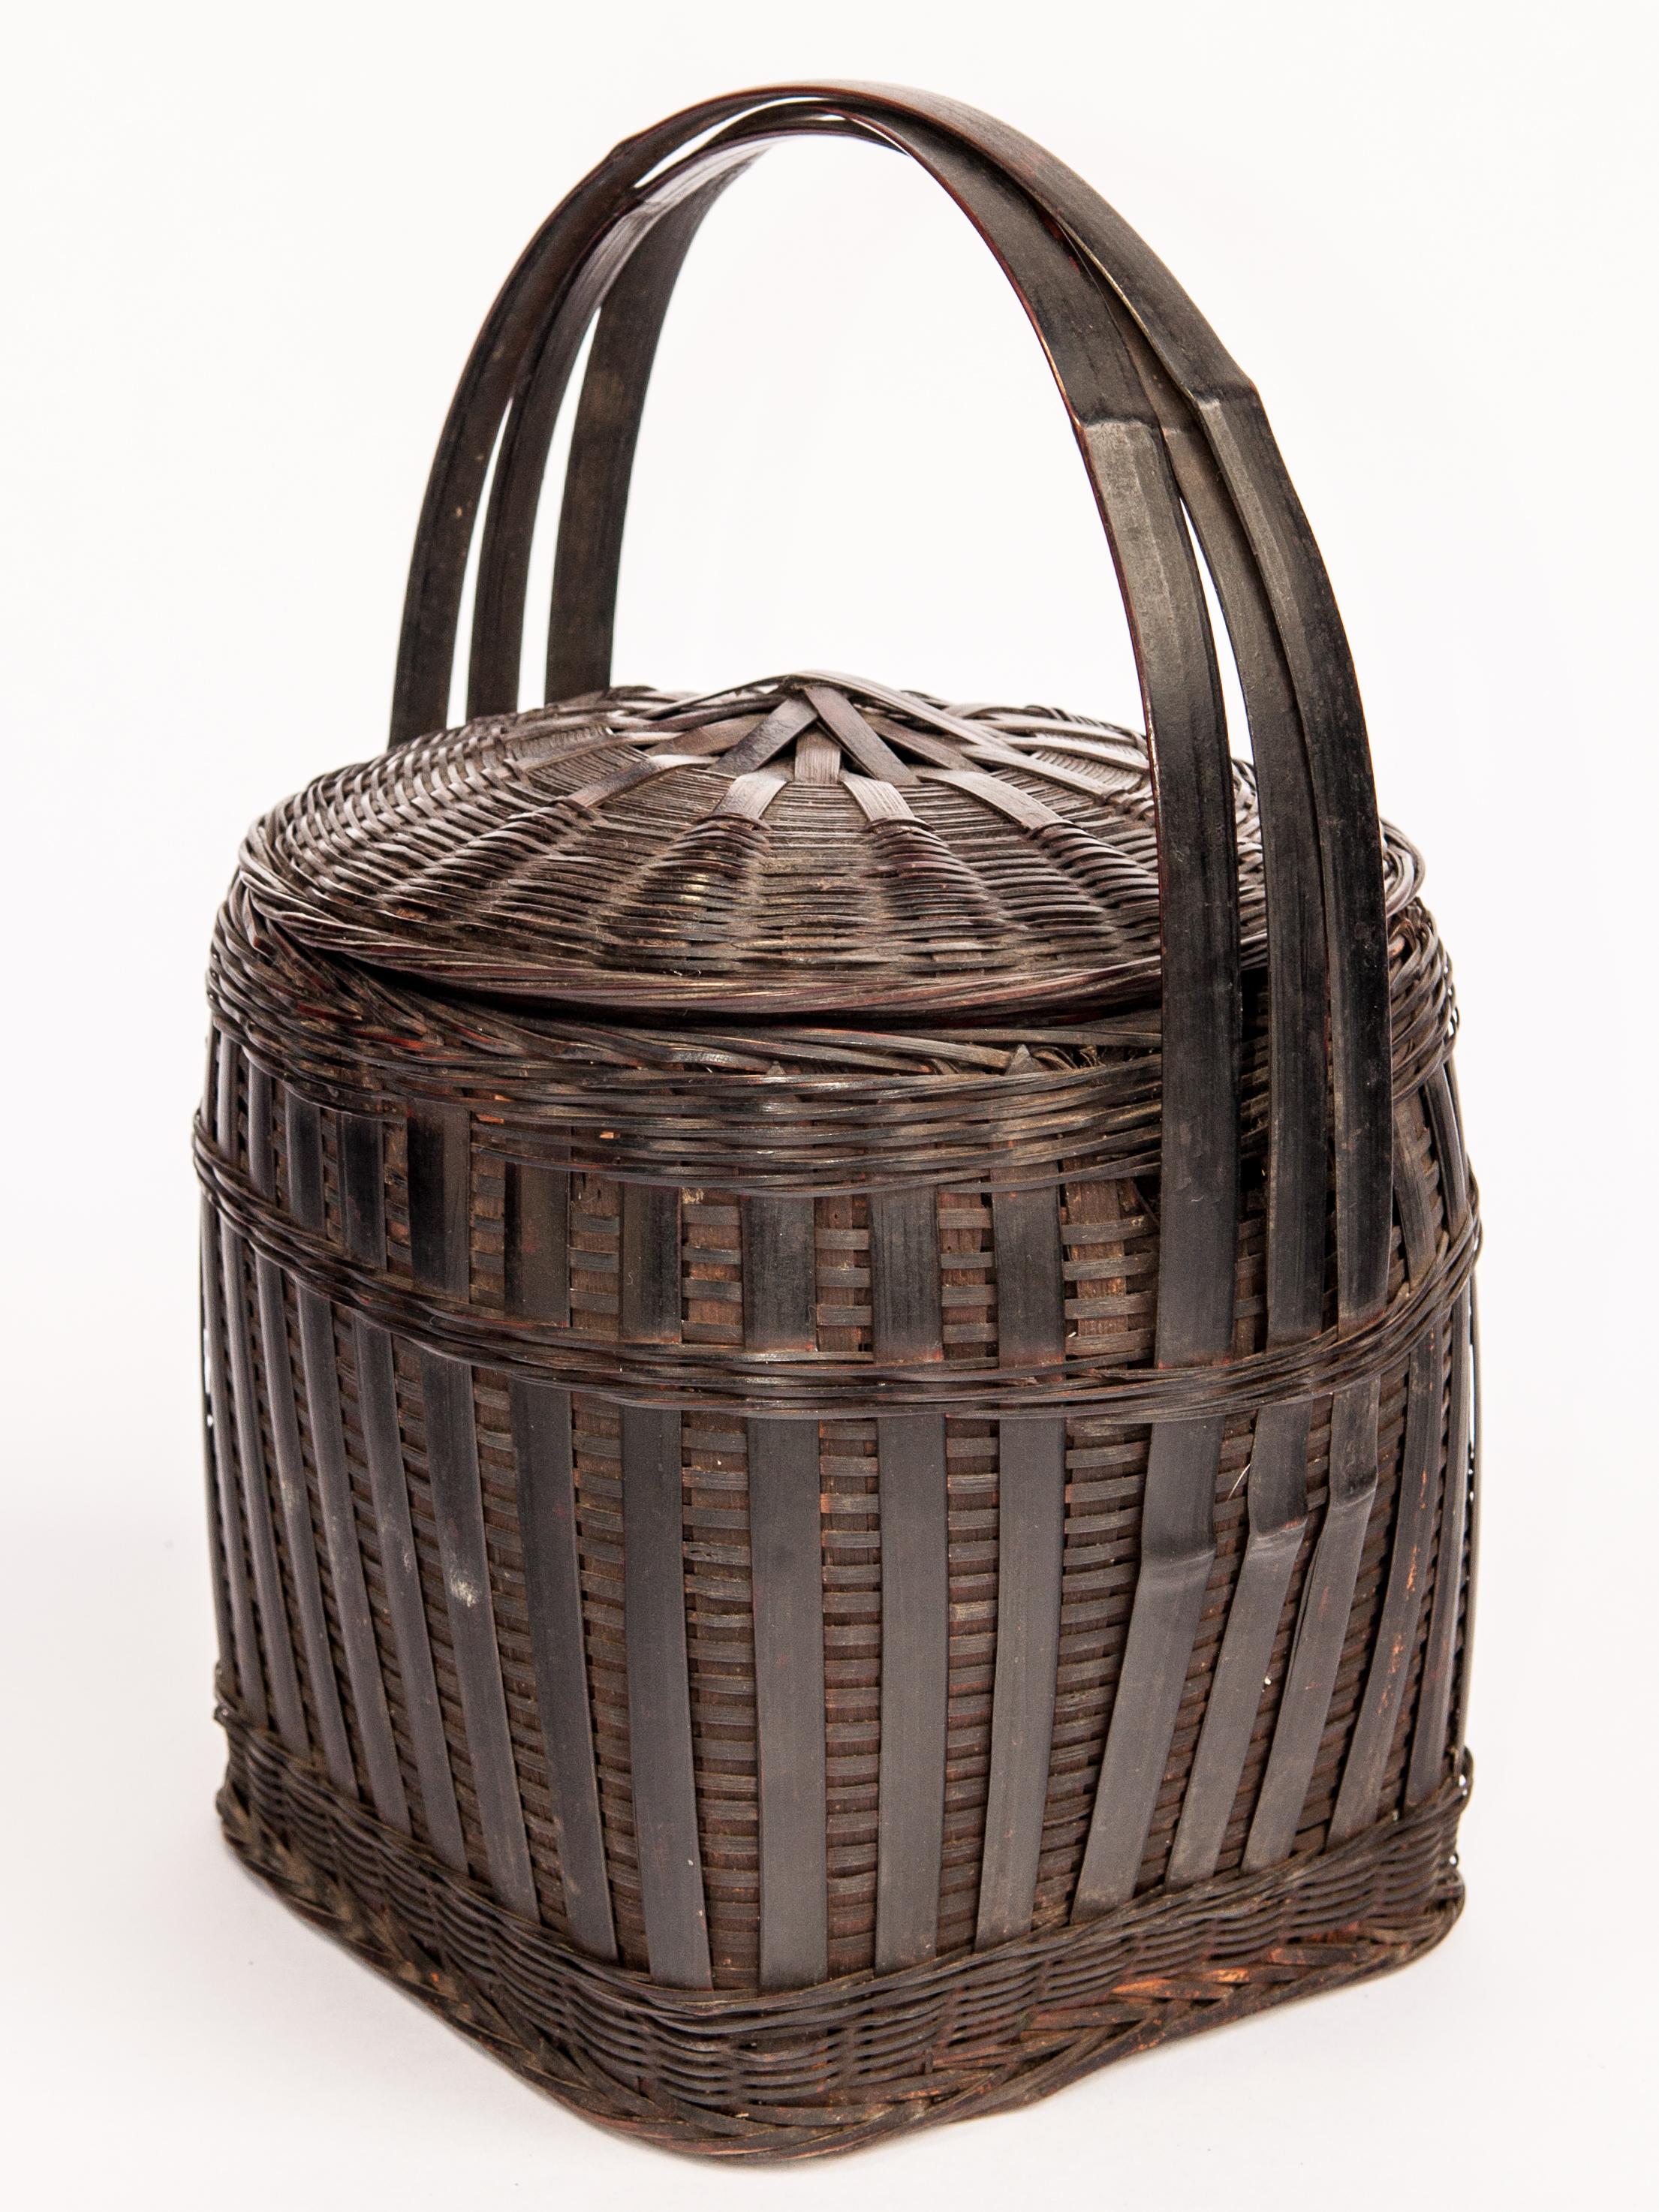 Hmong storage basket with lid and handle. Guizhou, China. Mid-20th century.
This strongly constructed utilitarian basket is hand made of bamboo and is imbued with a fine dark patina. It comes from a Hmong village in Guizhou, China, and was used as